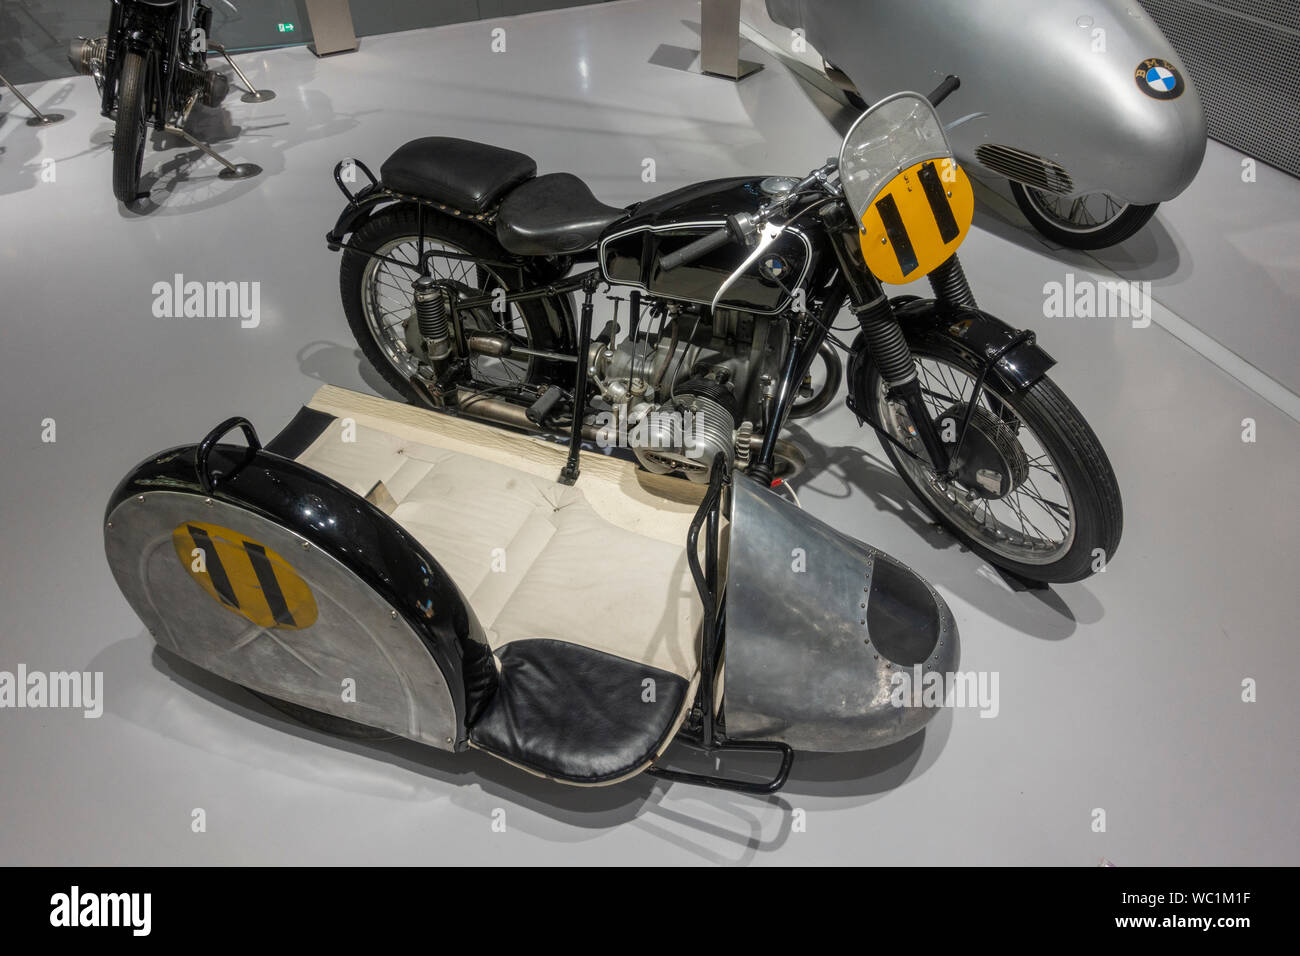 A BMW RS54 Sidecar ridden by Wilhelm Noll & Fritz Cron, part of the historical BMW racing motorcycles display, BMW Museum, Munich, Bavaria, Germany. Stock Photo